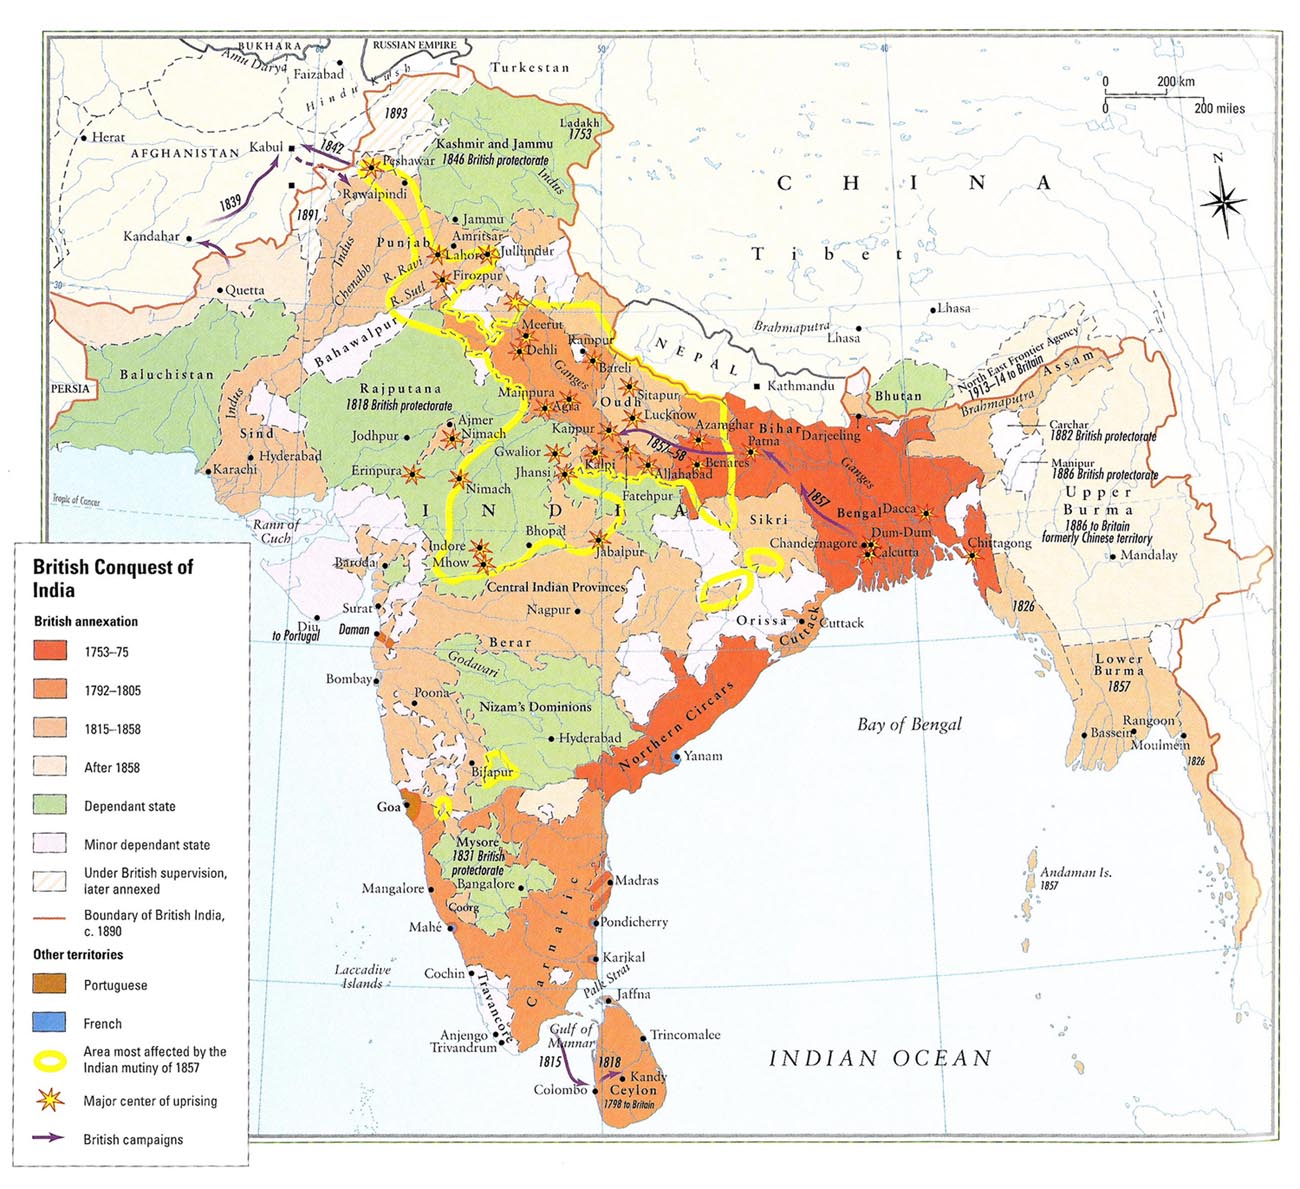 MG-British_Conquest_of_India_1753_to_1890.jpg